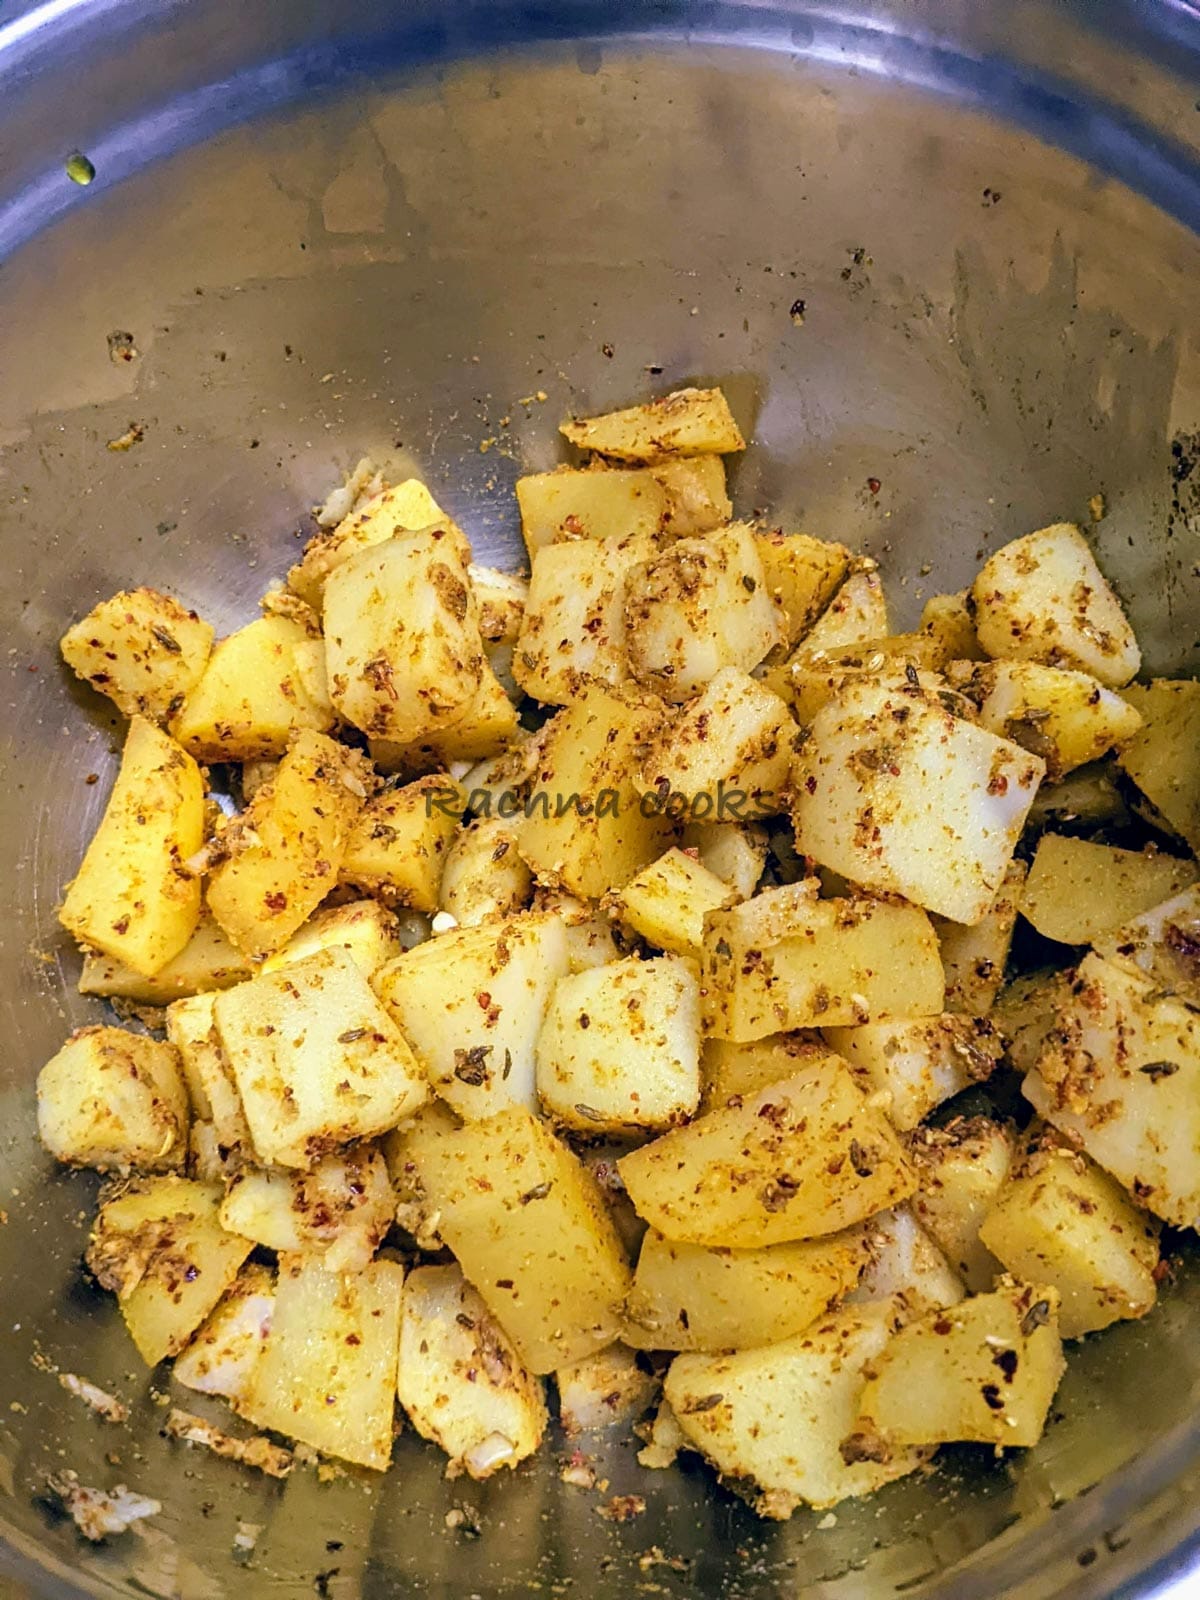 Boiled potato cubes with spices and oil